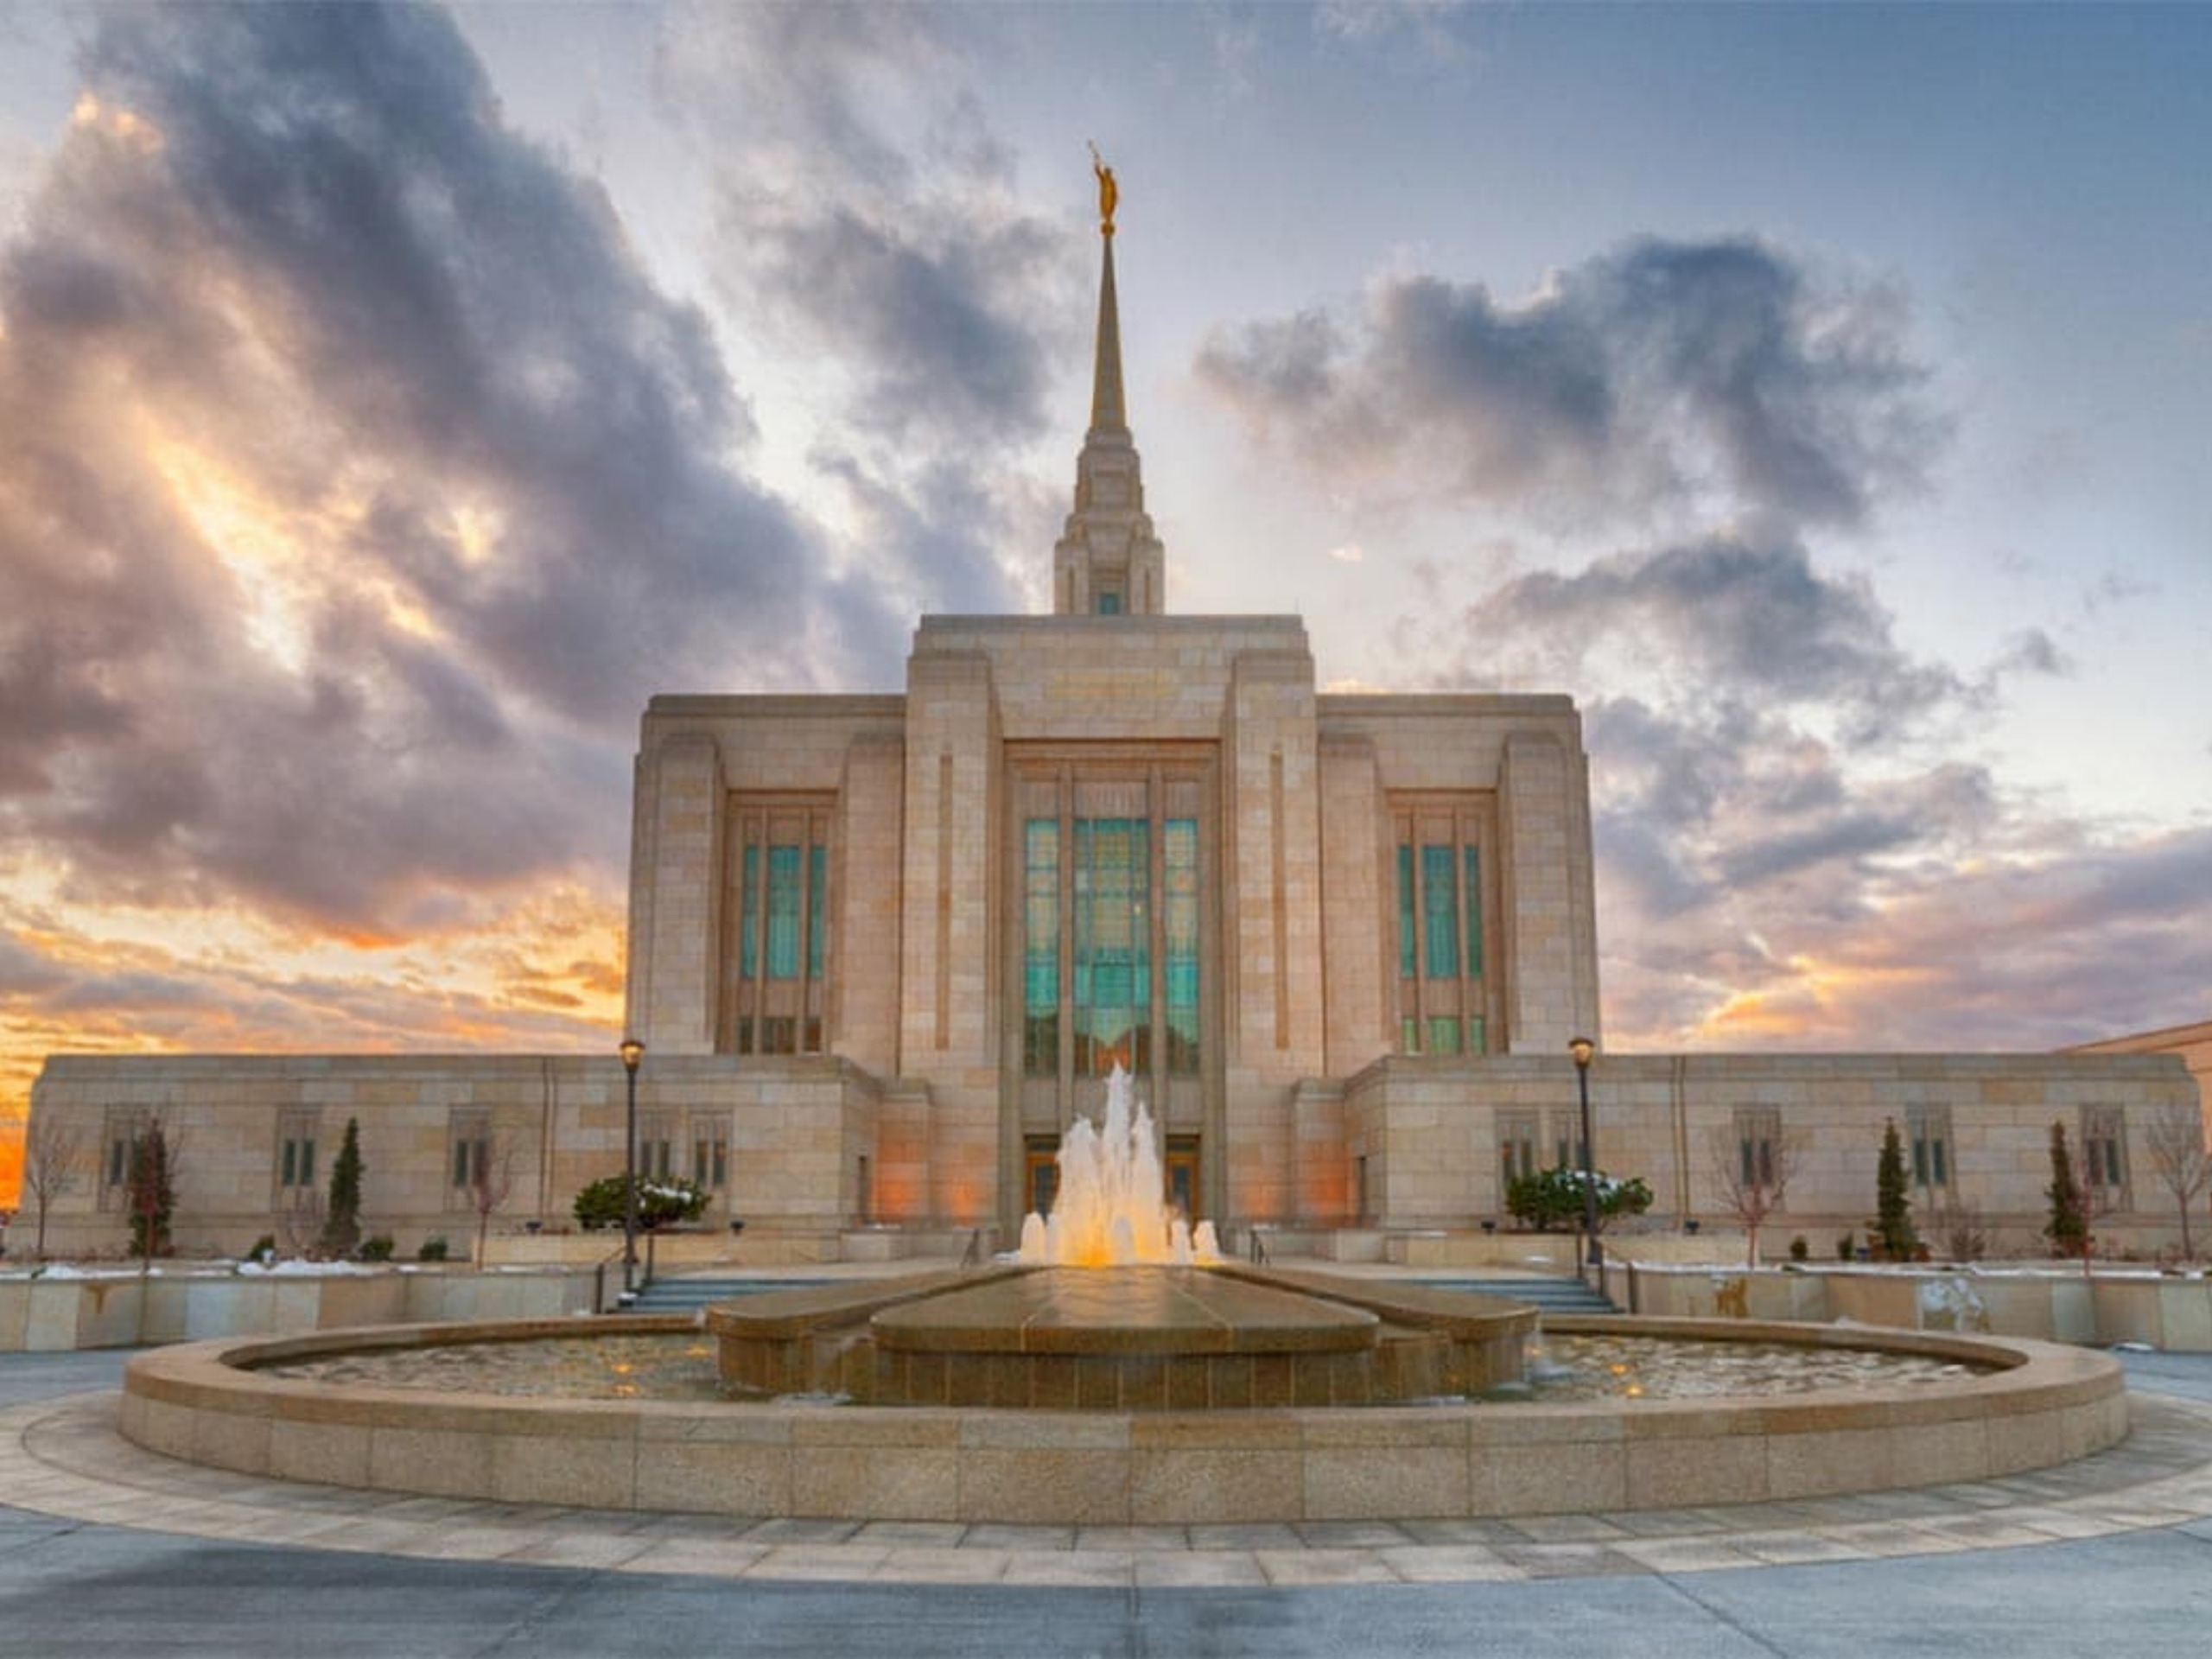 Ogden Temple of the Church of Jesus Christ of Latter Day Saints